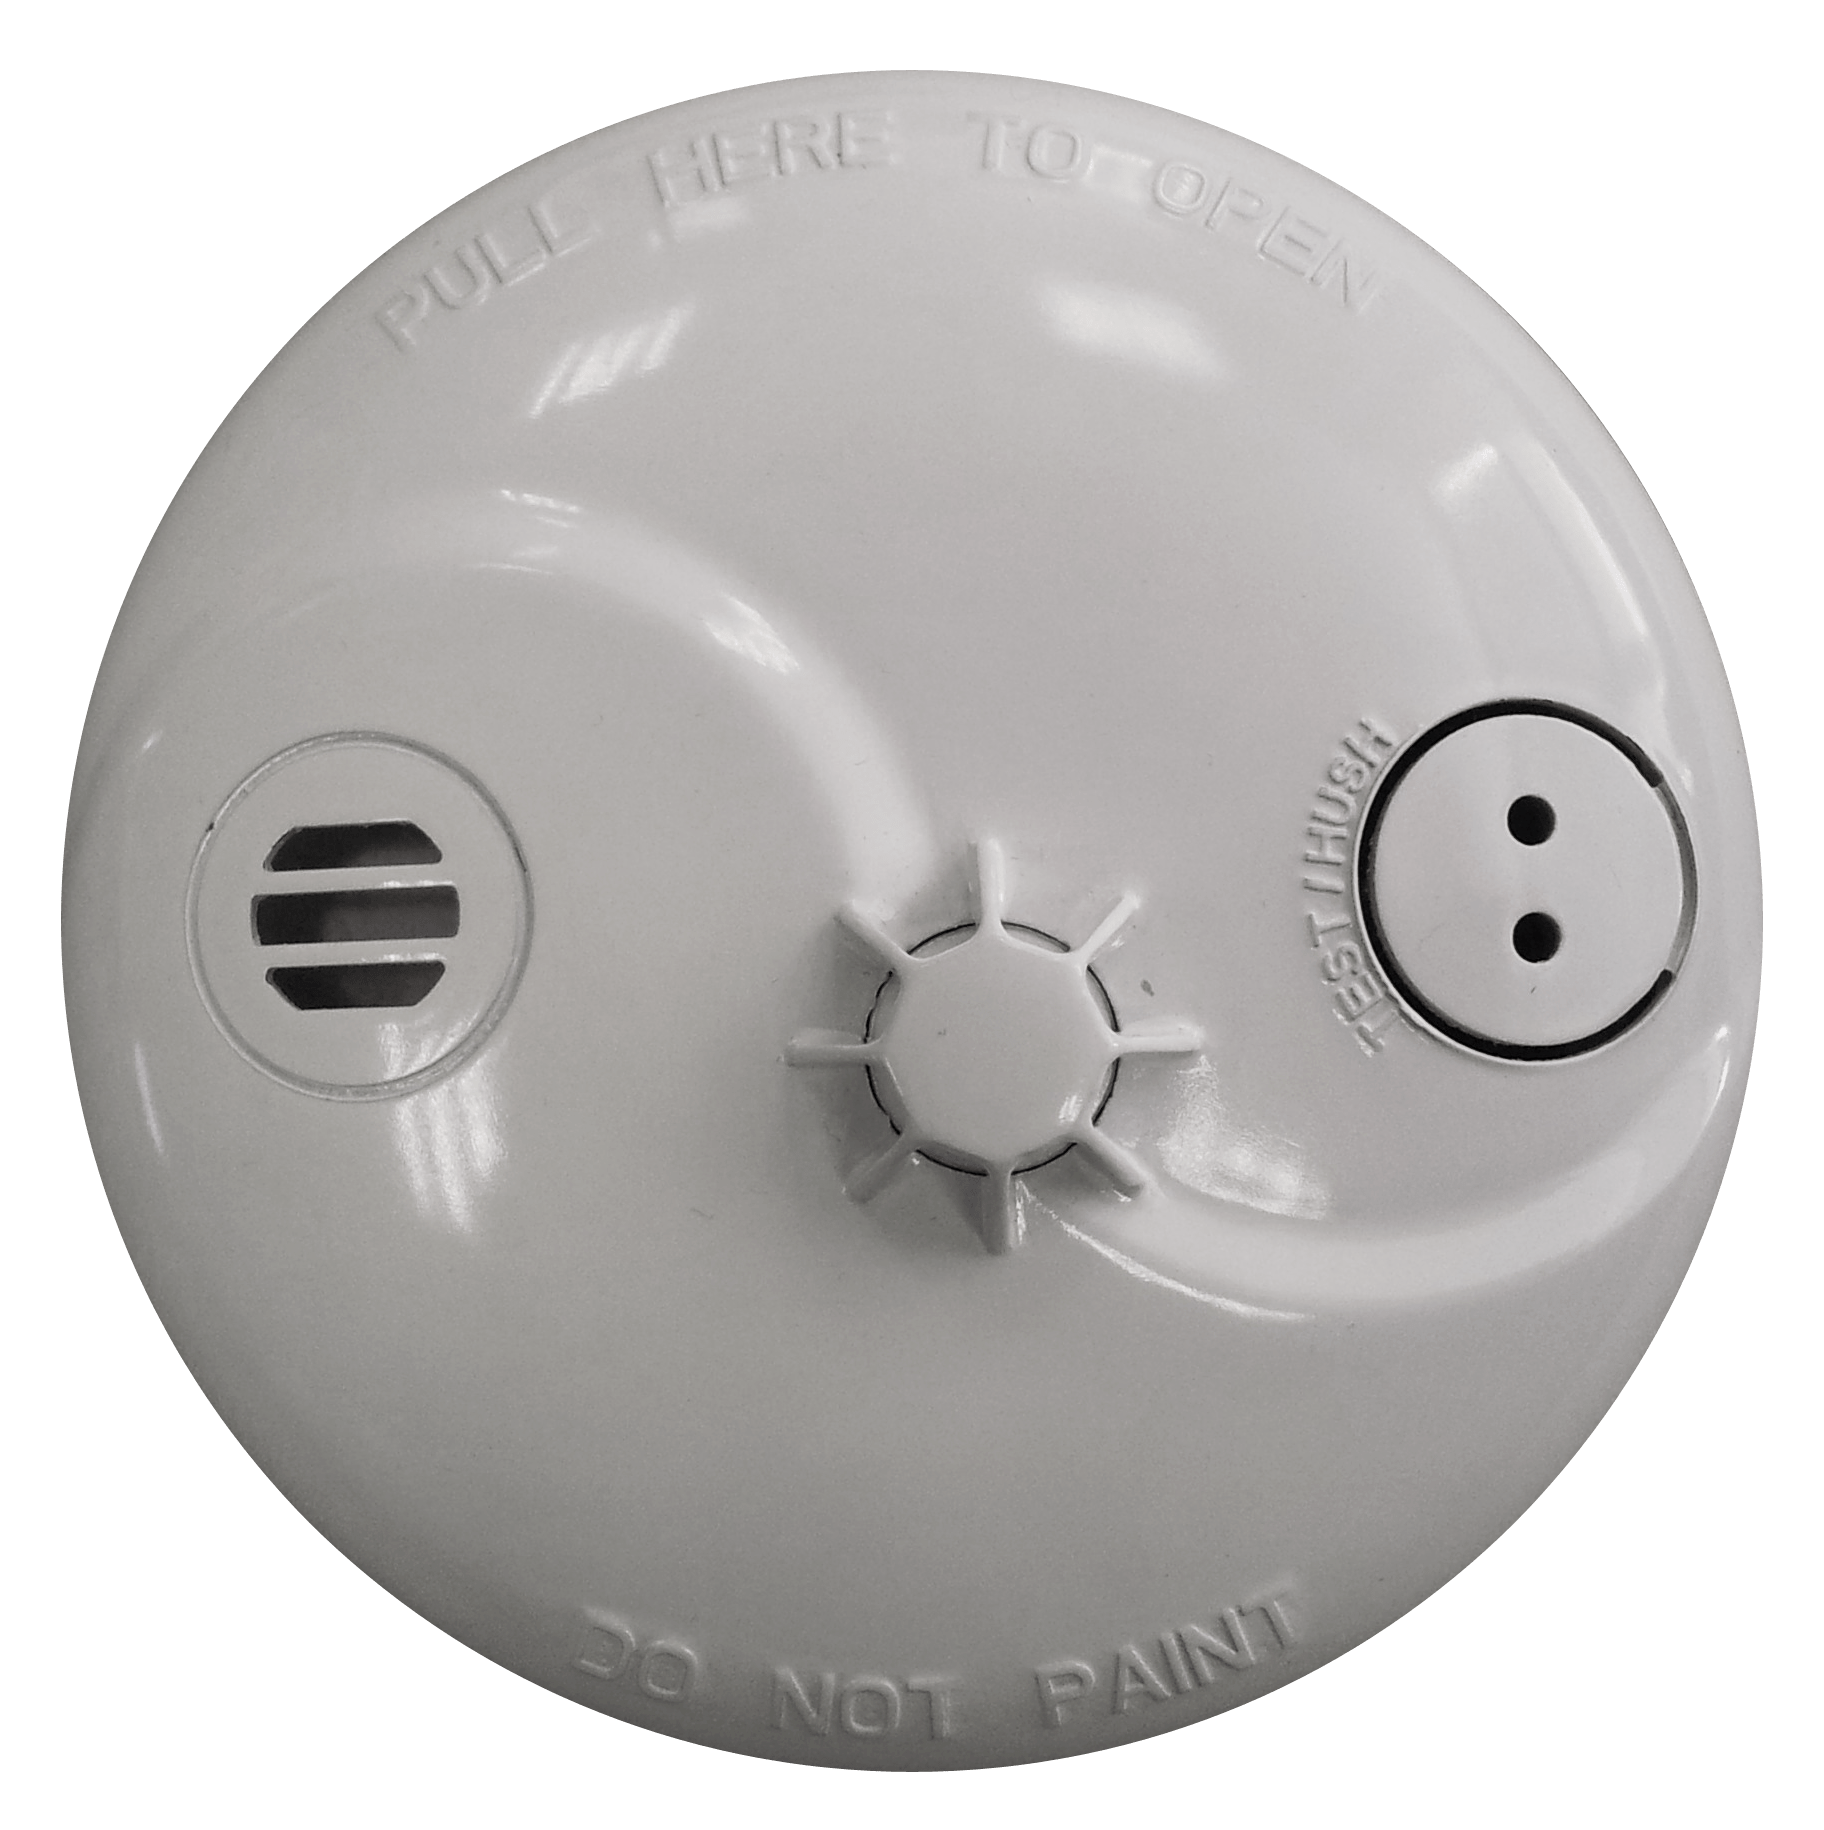 This battery-powered heat detector is designed to detect rapid temperature increases, providing reliable fire detection in various environments. Find it at Supply Master in Accra, Ghana. Fire Safety Equipment Buy Tools hardware Building materials